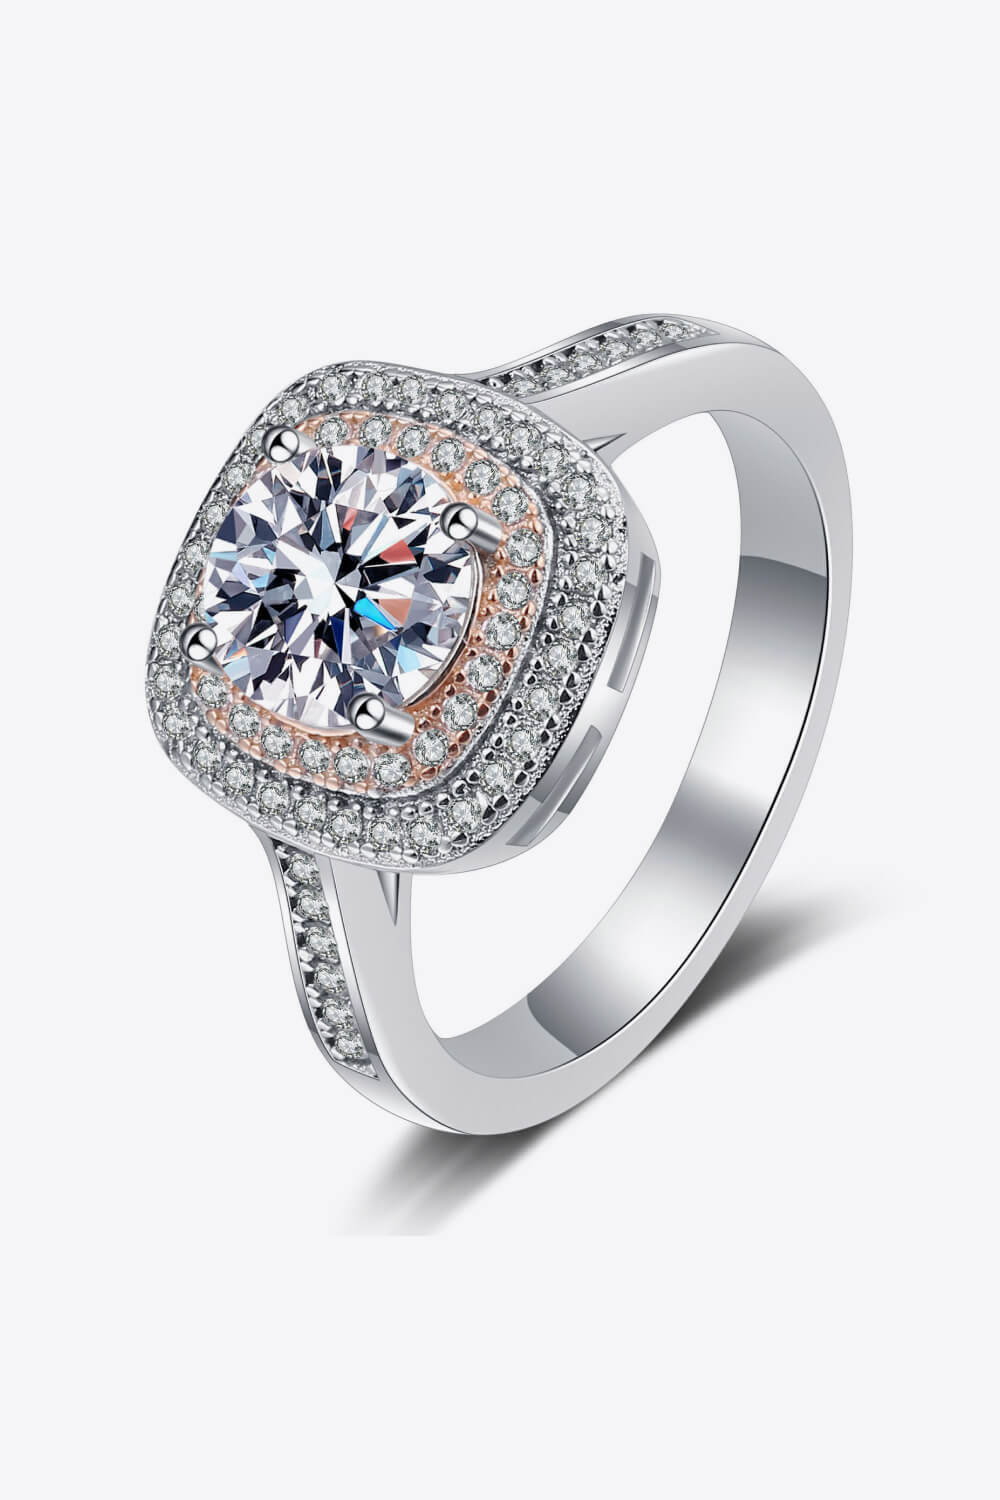 Need You Now Moissanite Ring - Cheeky Chic Boutique